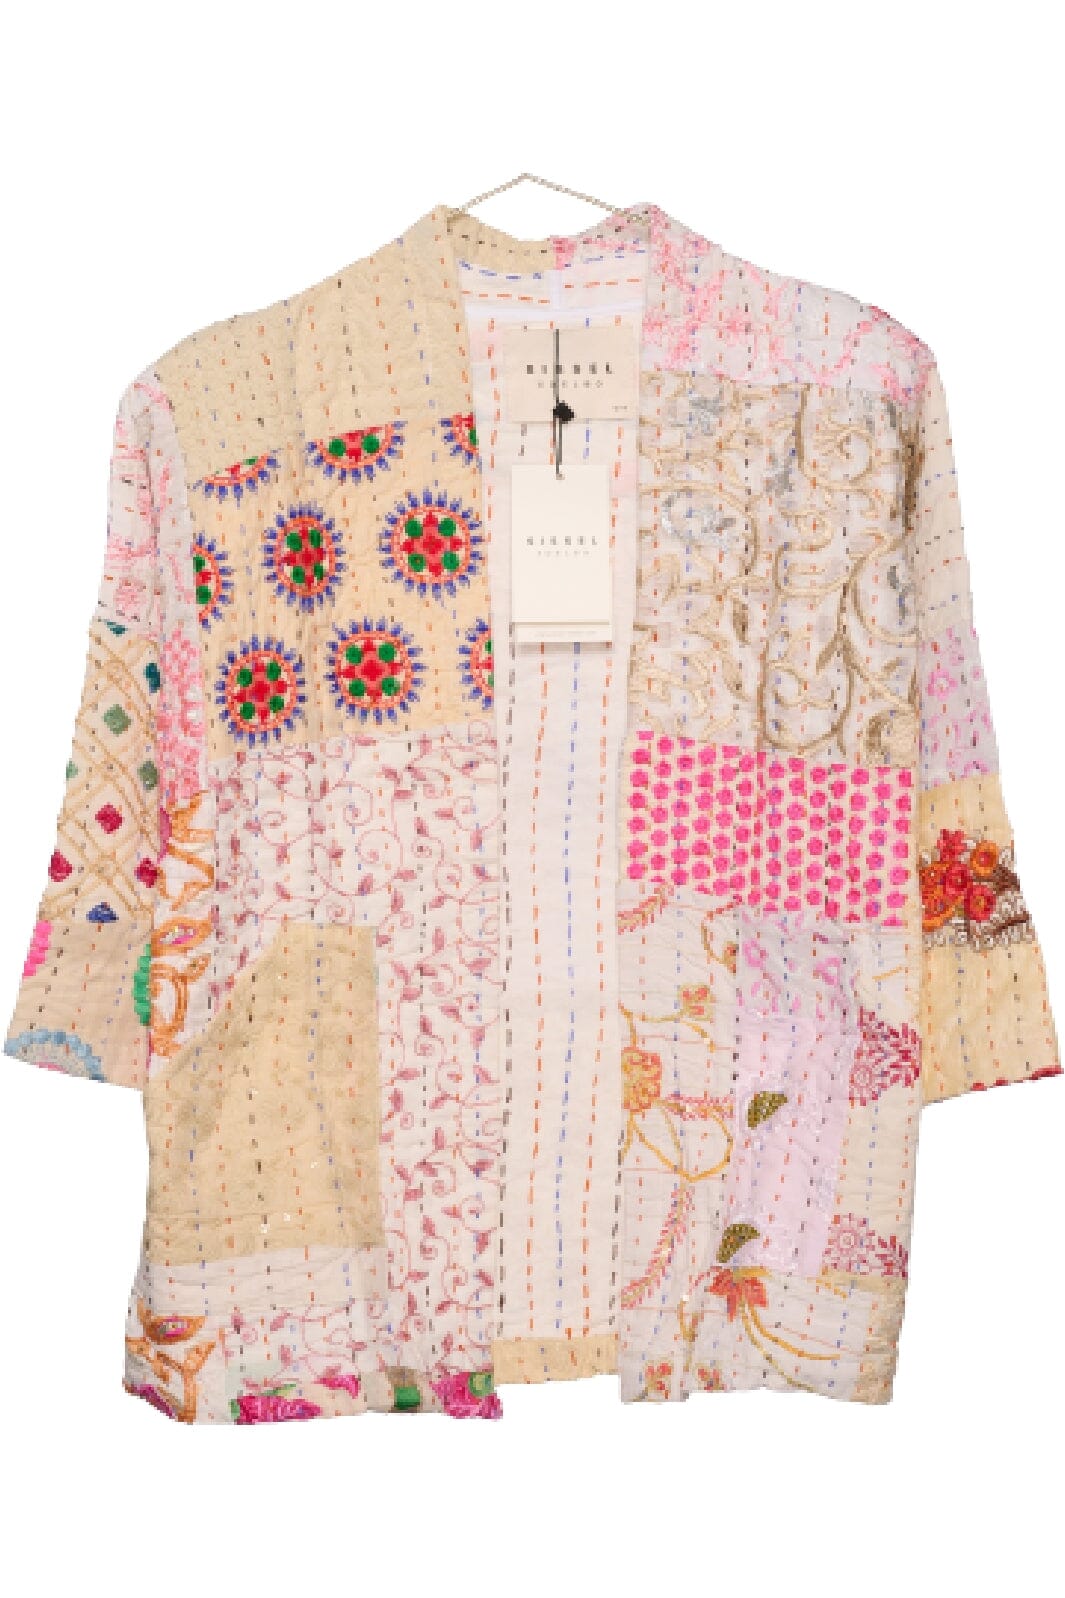 Sissel Edelbo - Tallulah Embroidery Patchwork Jacket,Tallulah Embroidery Patchwork Jacket - No. 419 Jakker 